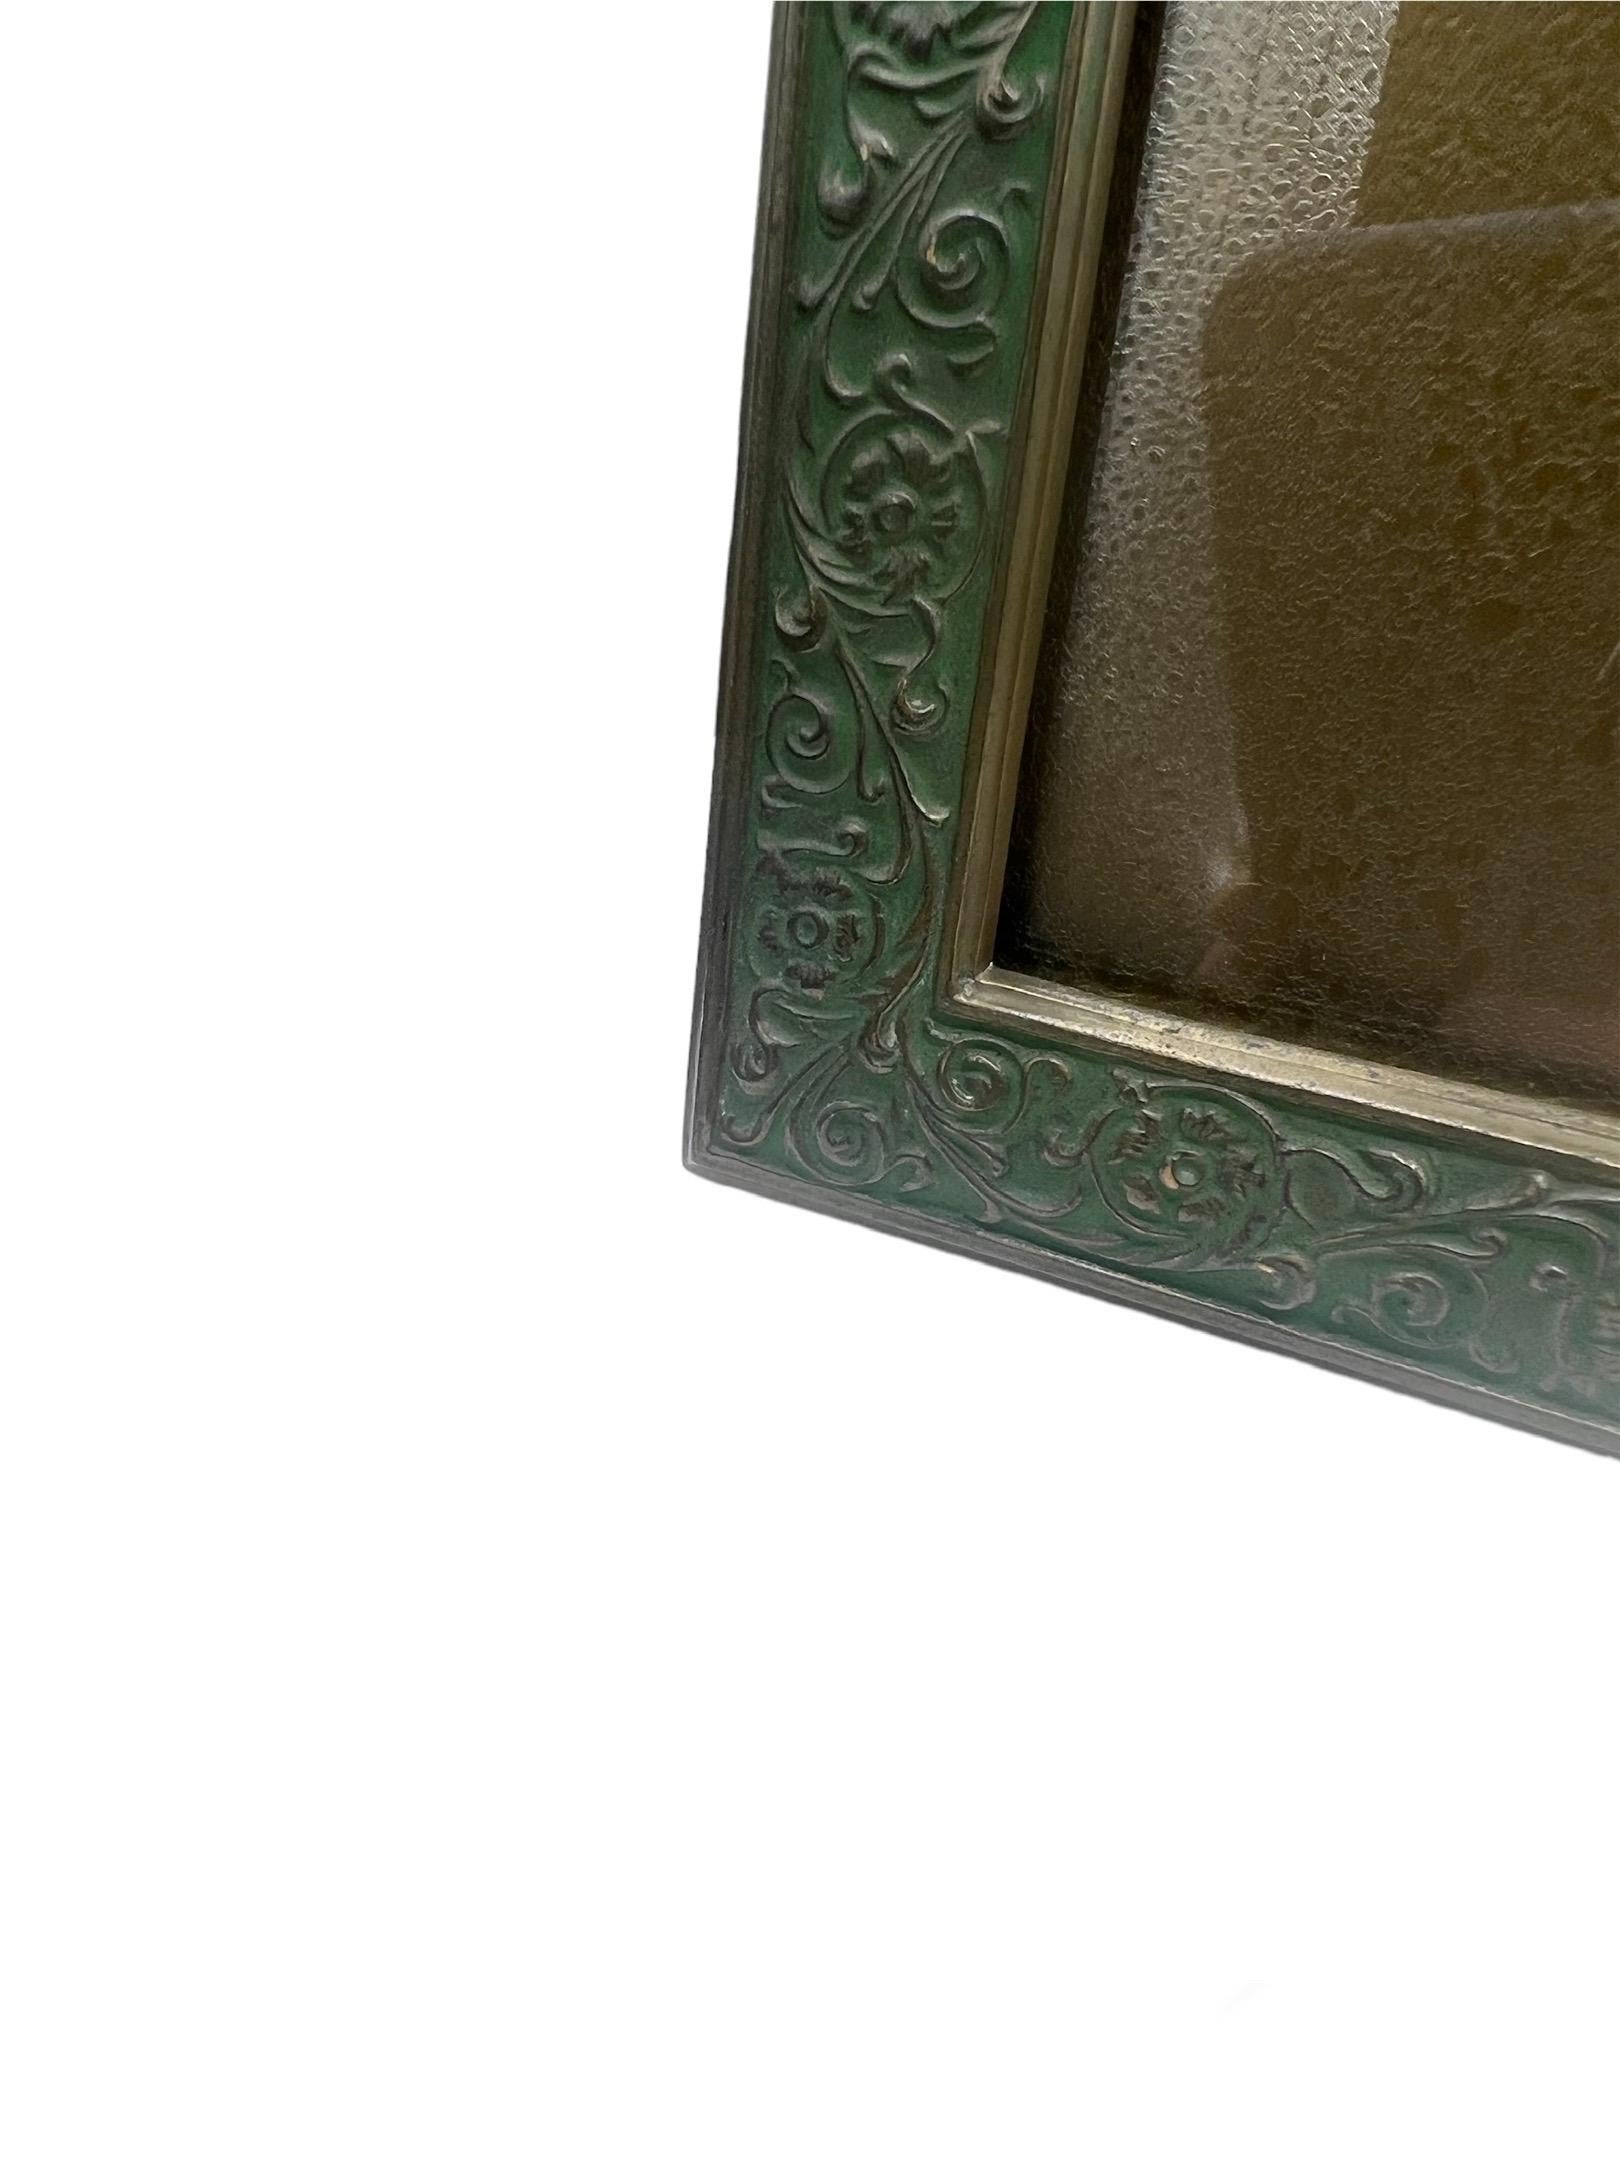 Tiffany Studios gilt-bronze picture frame, Stamped Tiffany Studios/NY/1611. For Sale 2